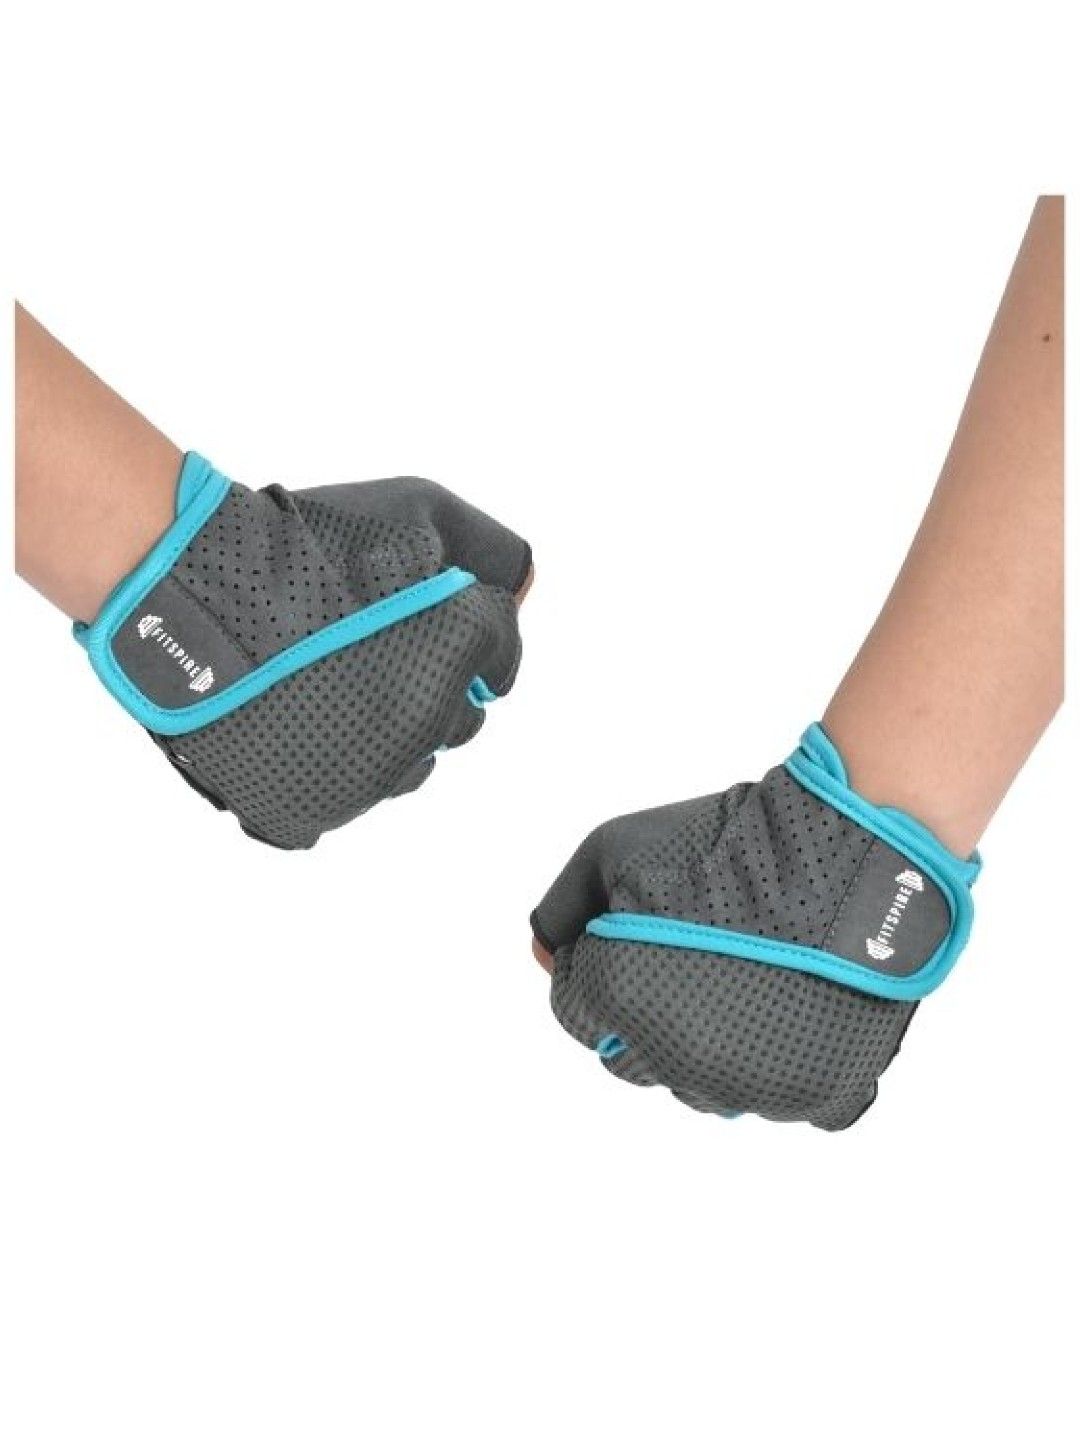 Sunbeams Lifestyle Fitspire Training Gloves Microfiber Workout Equipment (Women) (No Color- Image 3)